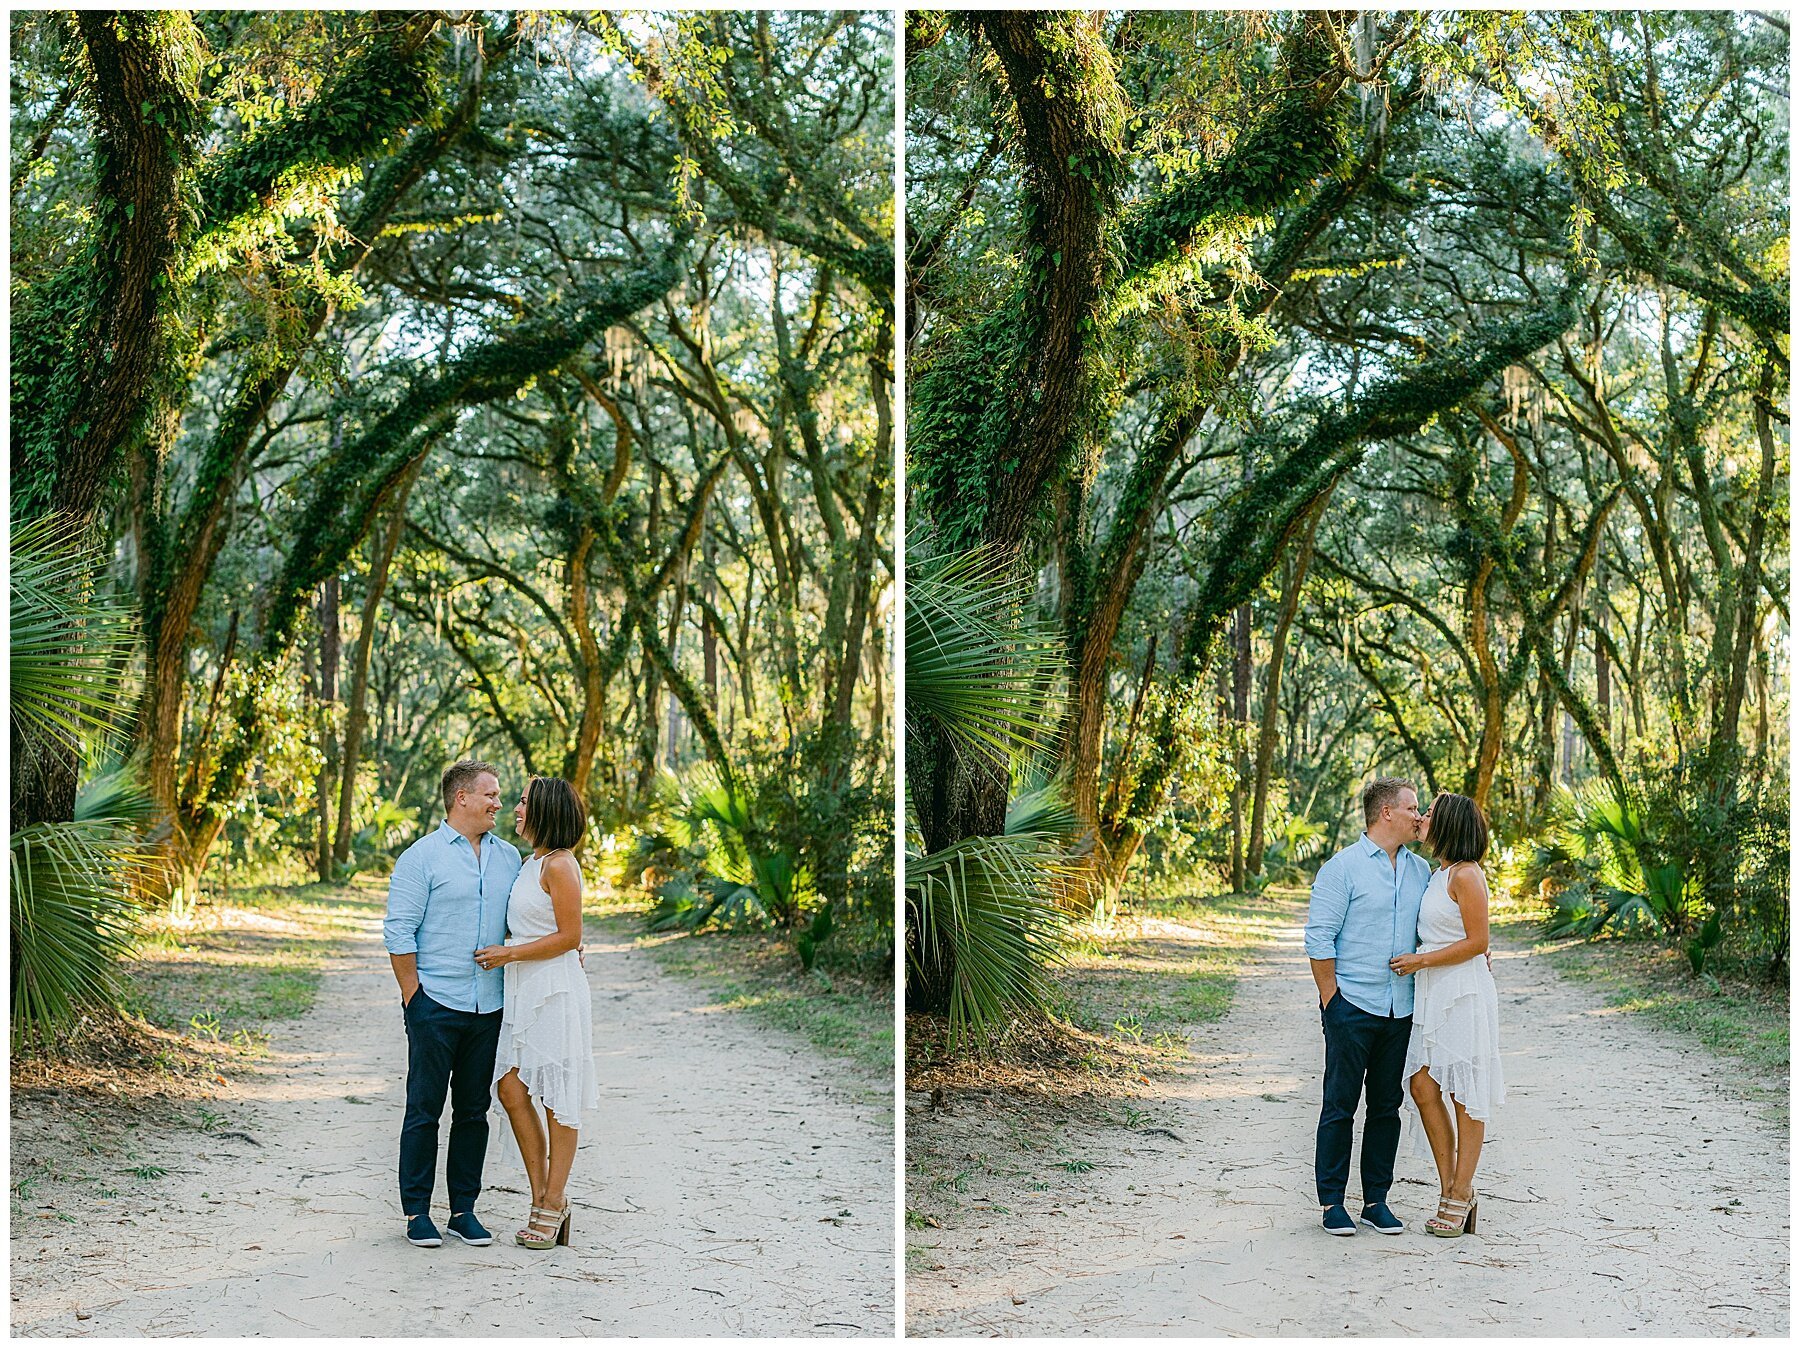 Katherine_Ives_Photography_Mcmillen_Montage_Palmetto_Bluff_22.jpg